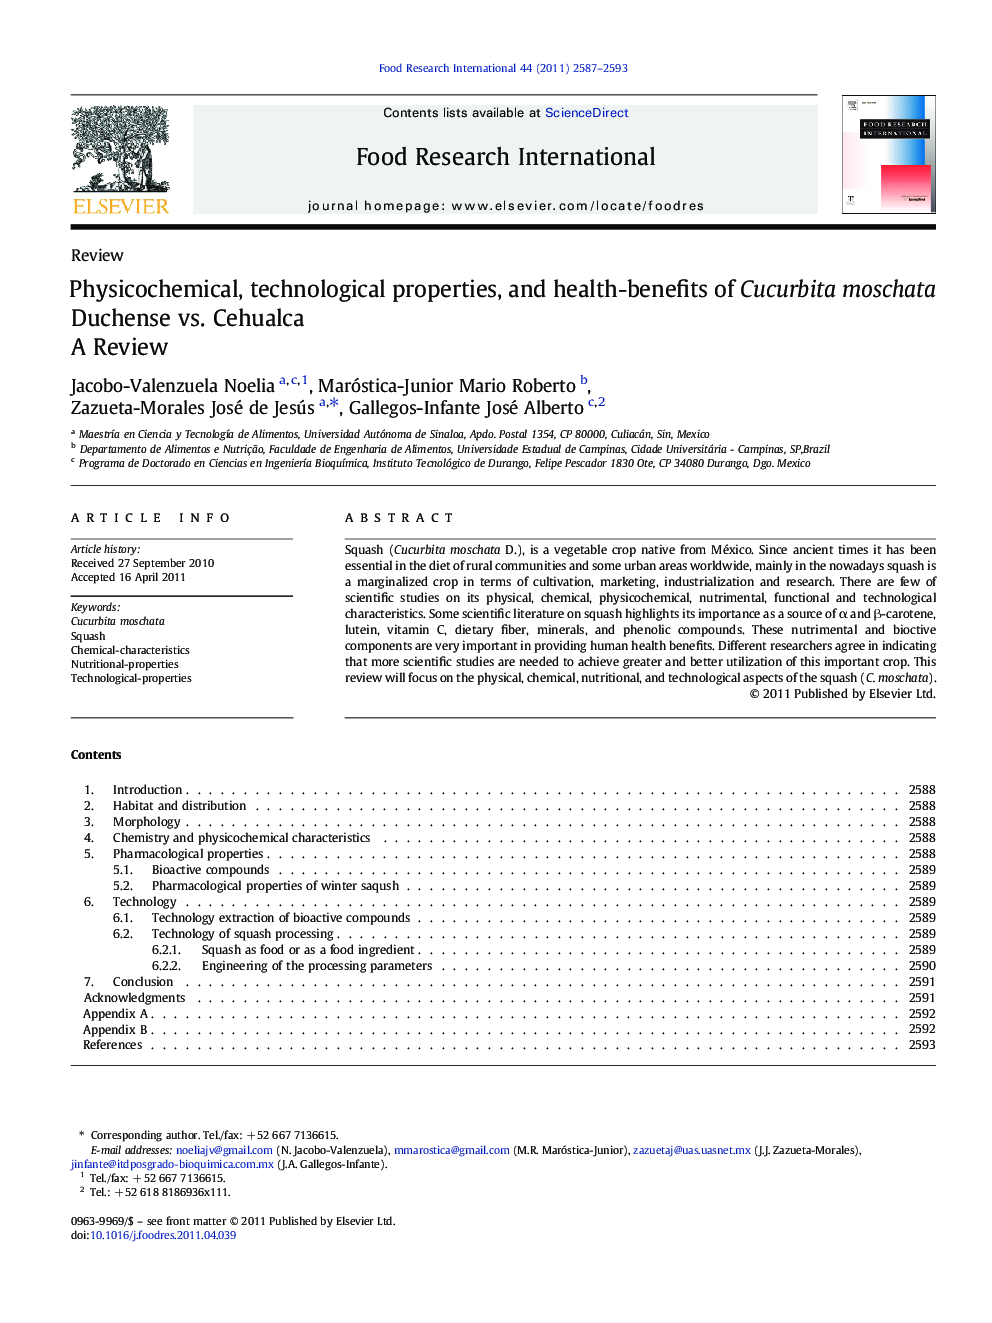 Physicochemical, technological properties, and health-benefits of Cucurbita moschata Duchense vs. Cehualca: A Review